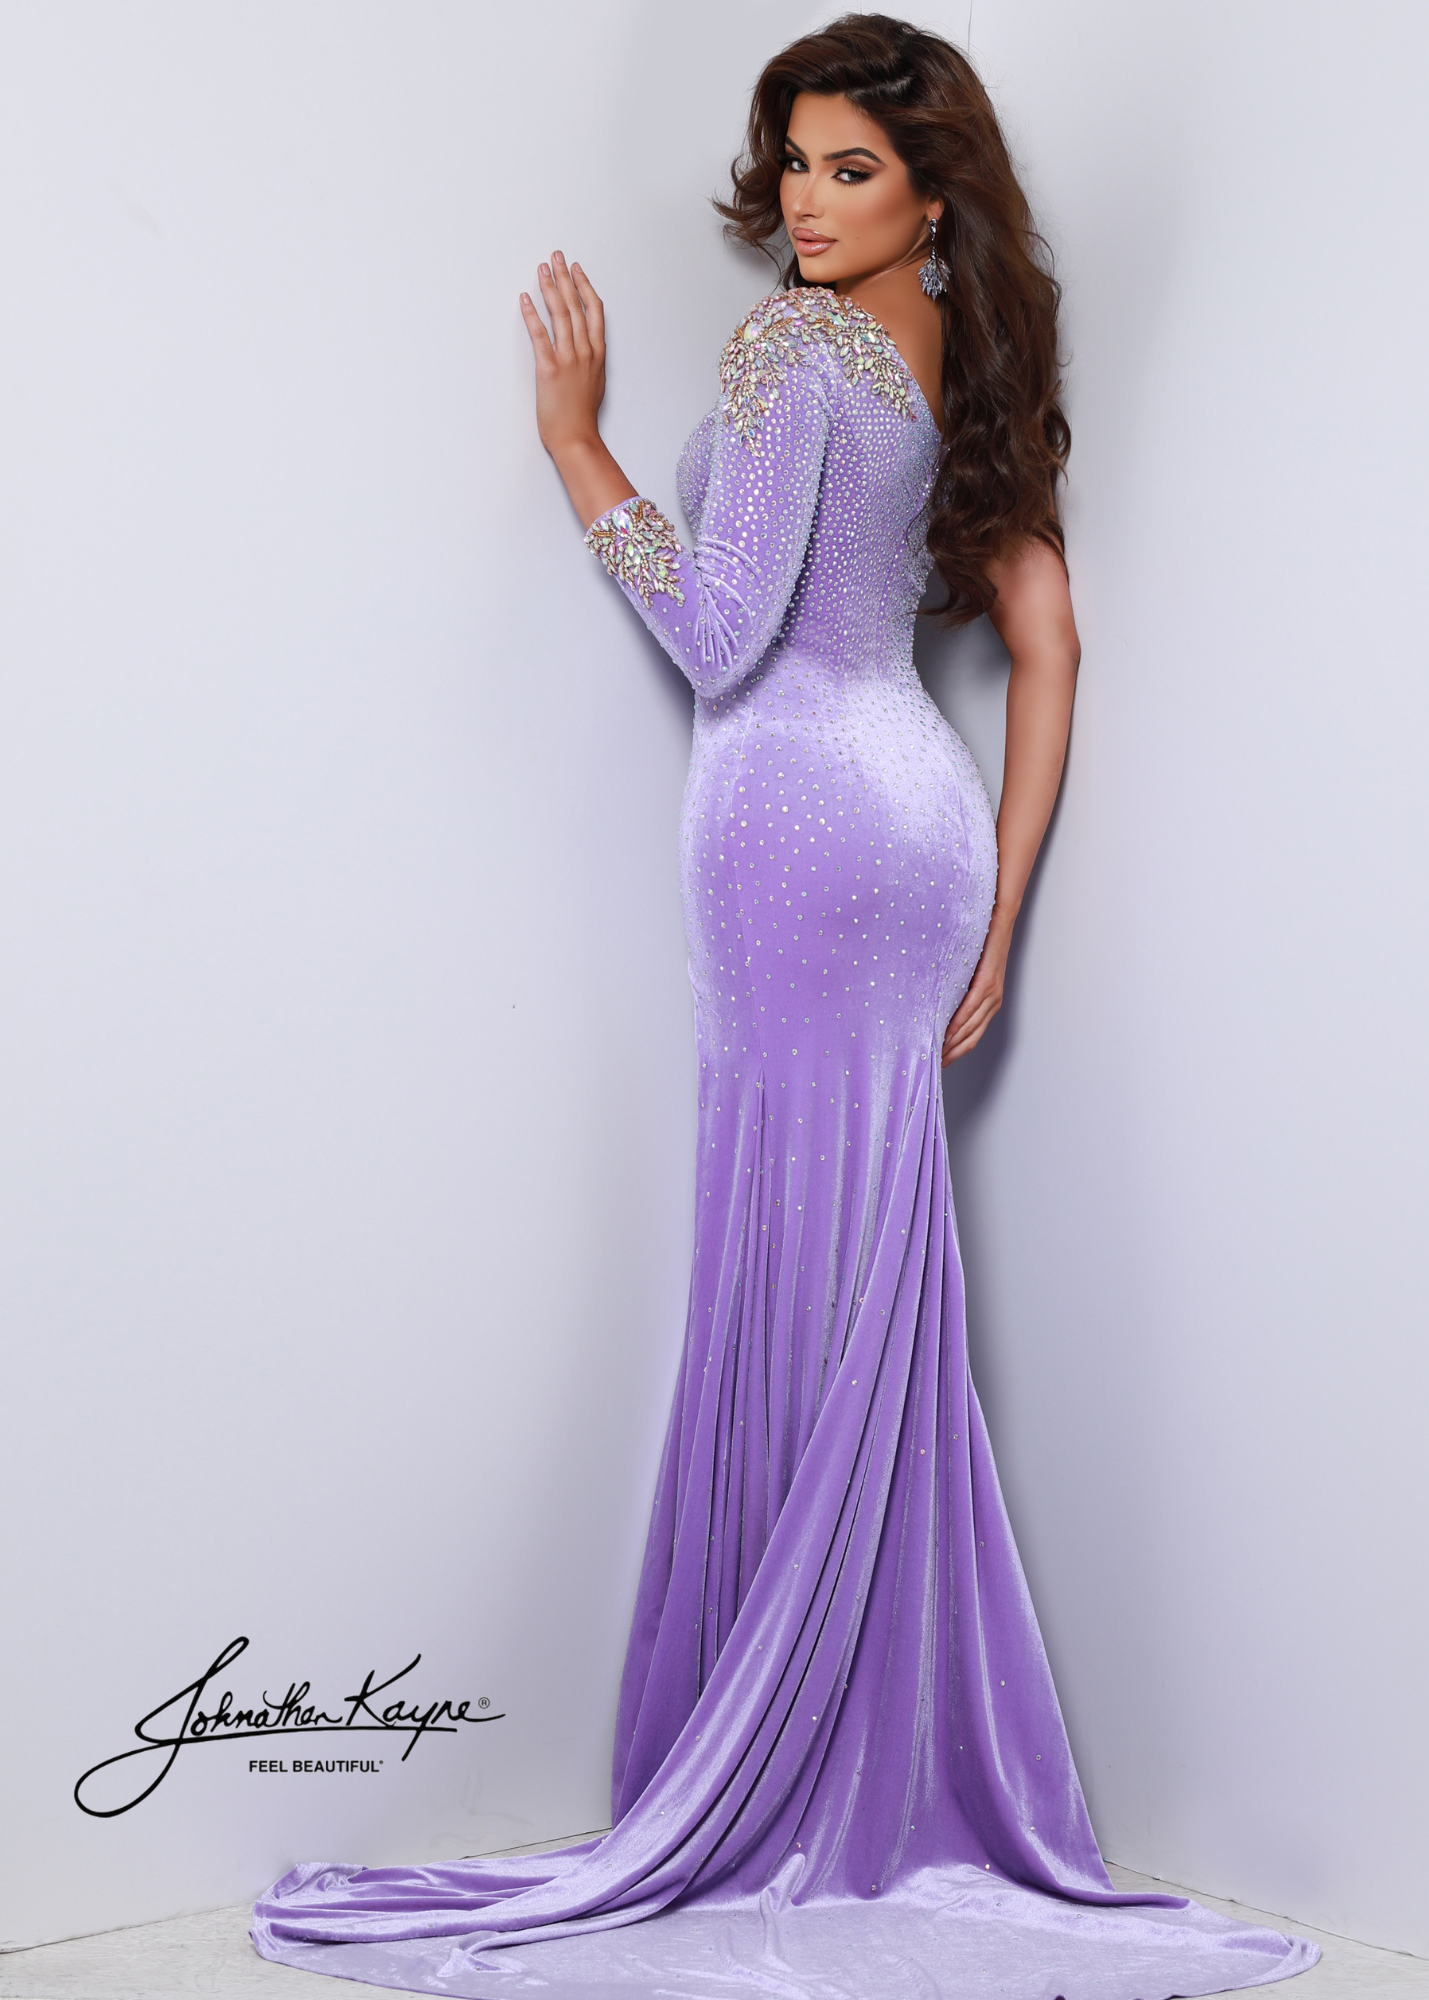 The Johnathan Kayne 2610 is a luxurious one-shoulder evening gown crafted from high-quality stretch velvet and embellished with hand-beaded rhinestones. The dress features a thigh-high slit and long sleeves for a chic, stylish look. Available in a variety of stunning hues, this breathtaking dress is sure to make you the star of any special occasion.  Colors: Flamingo, Neon Orange, Teal, Violet  Sizes: 00, 0, 2, 4, 6, 8, 10, 12, 14, 16, 18, 20, 22, 24